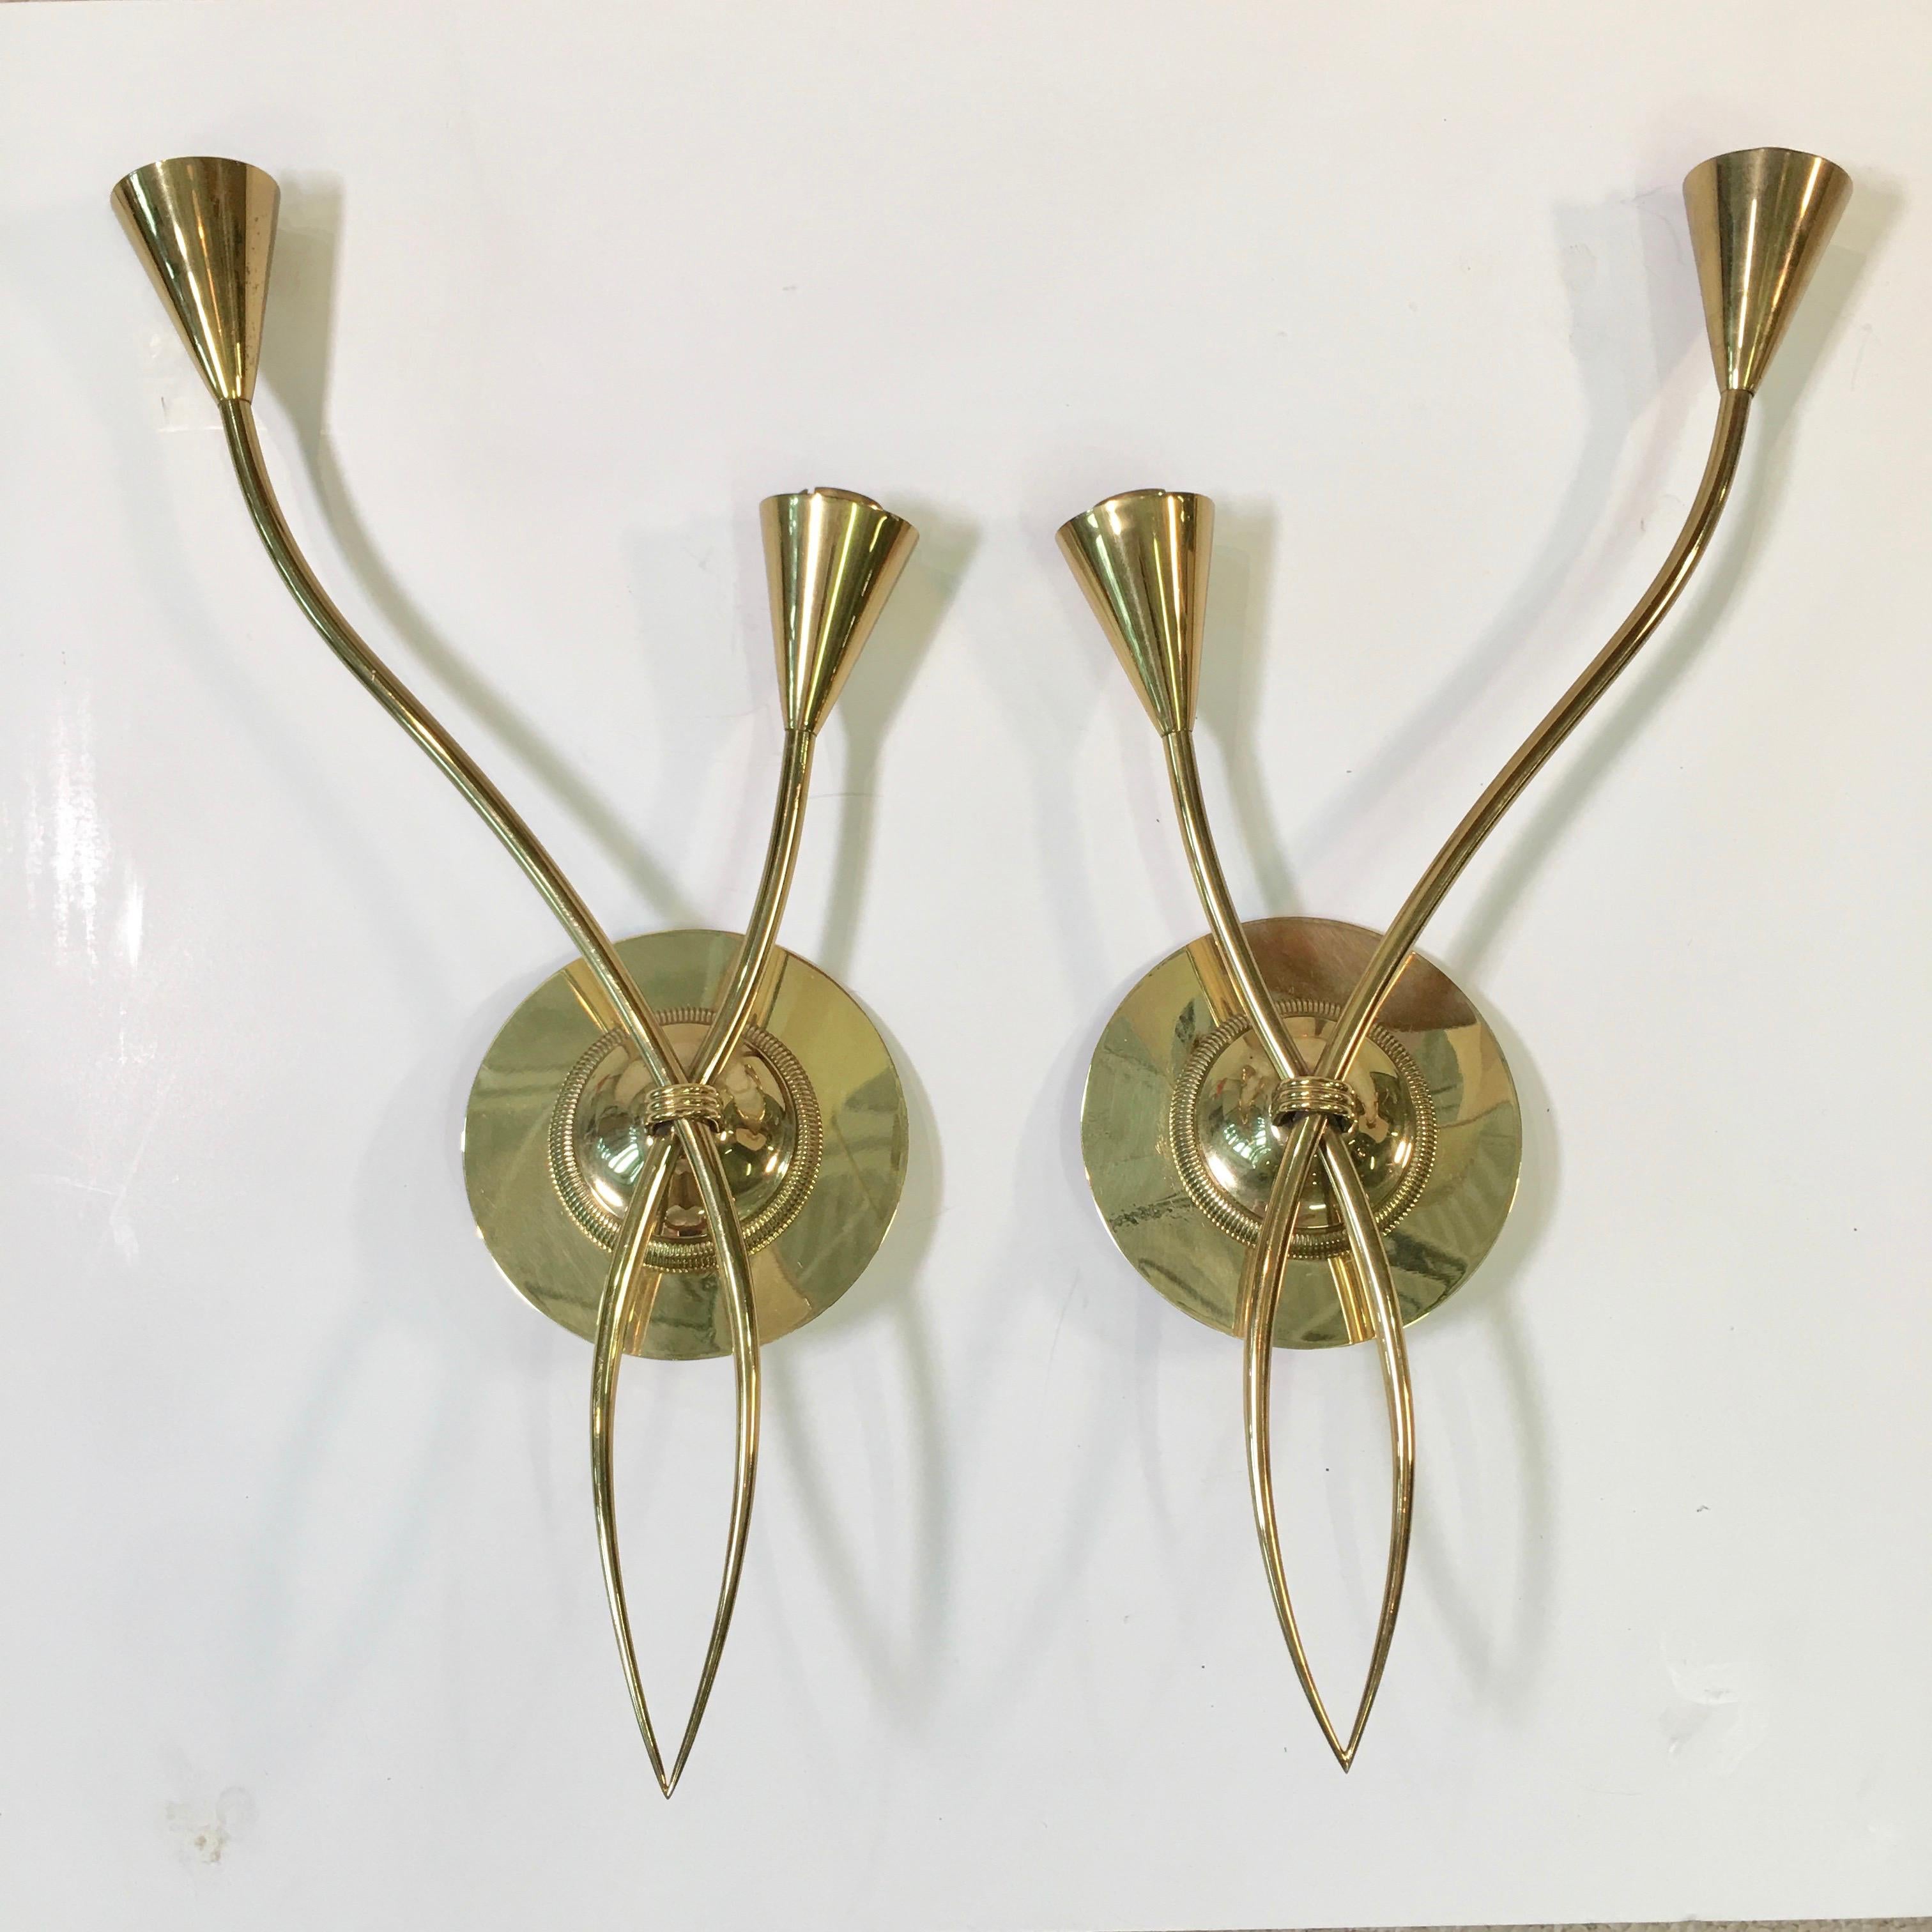 Pair of sinewy vine like wall sconces by Maison Arlus, Paris 1955 in all brass. Model n°1369. We have fitted them with custom made brass backplates for ease of mounting to a junction box. These have been rewired and are ready to install.
Presently